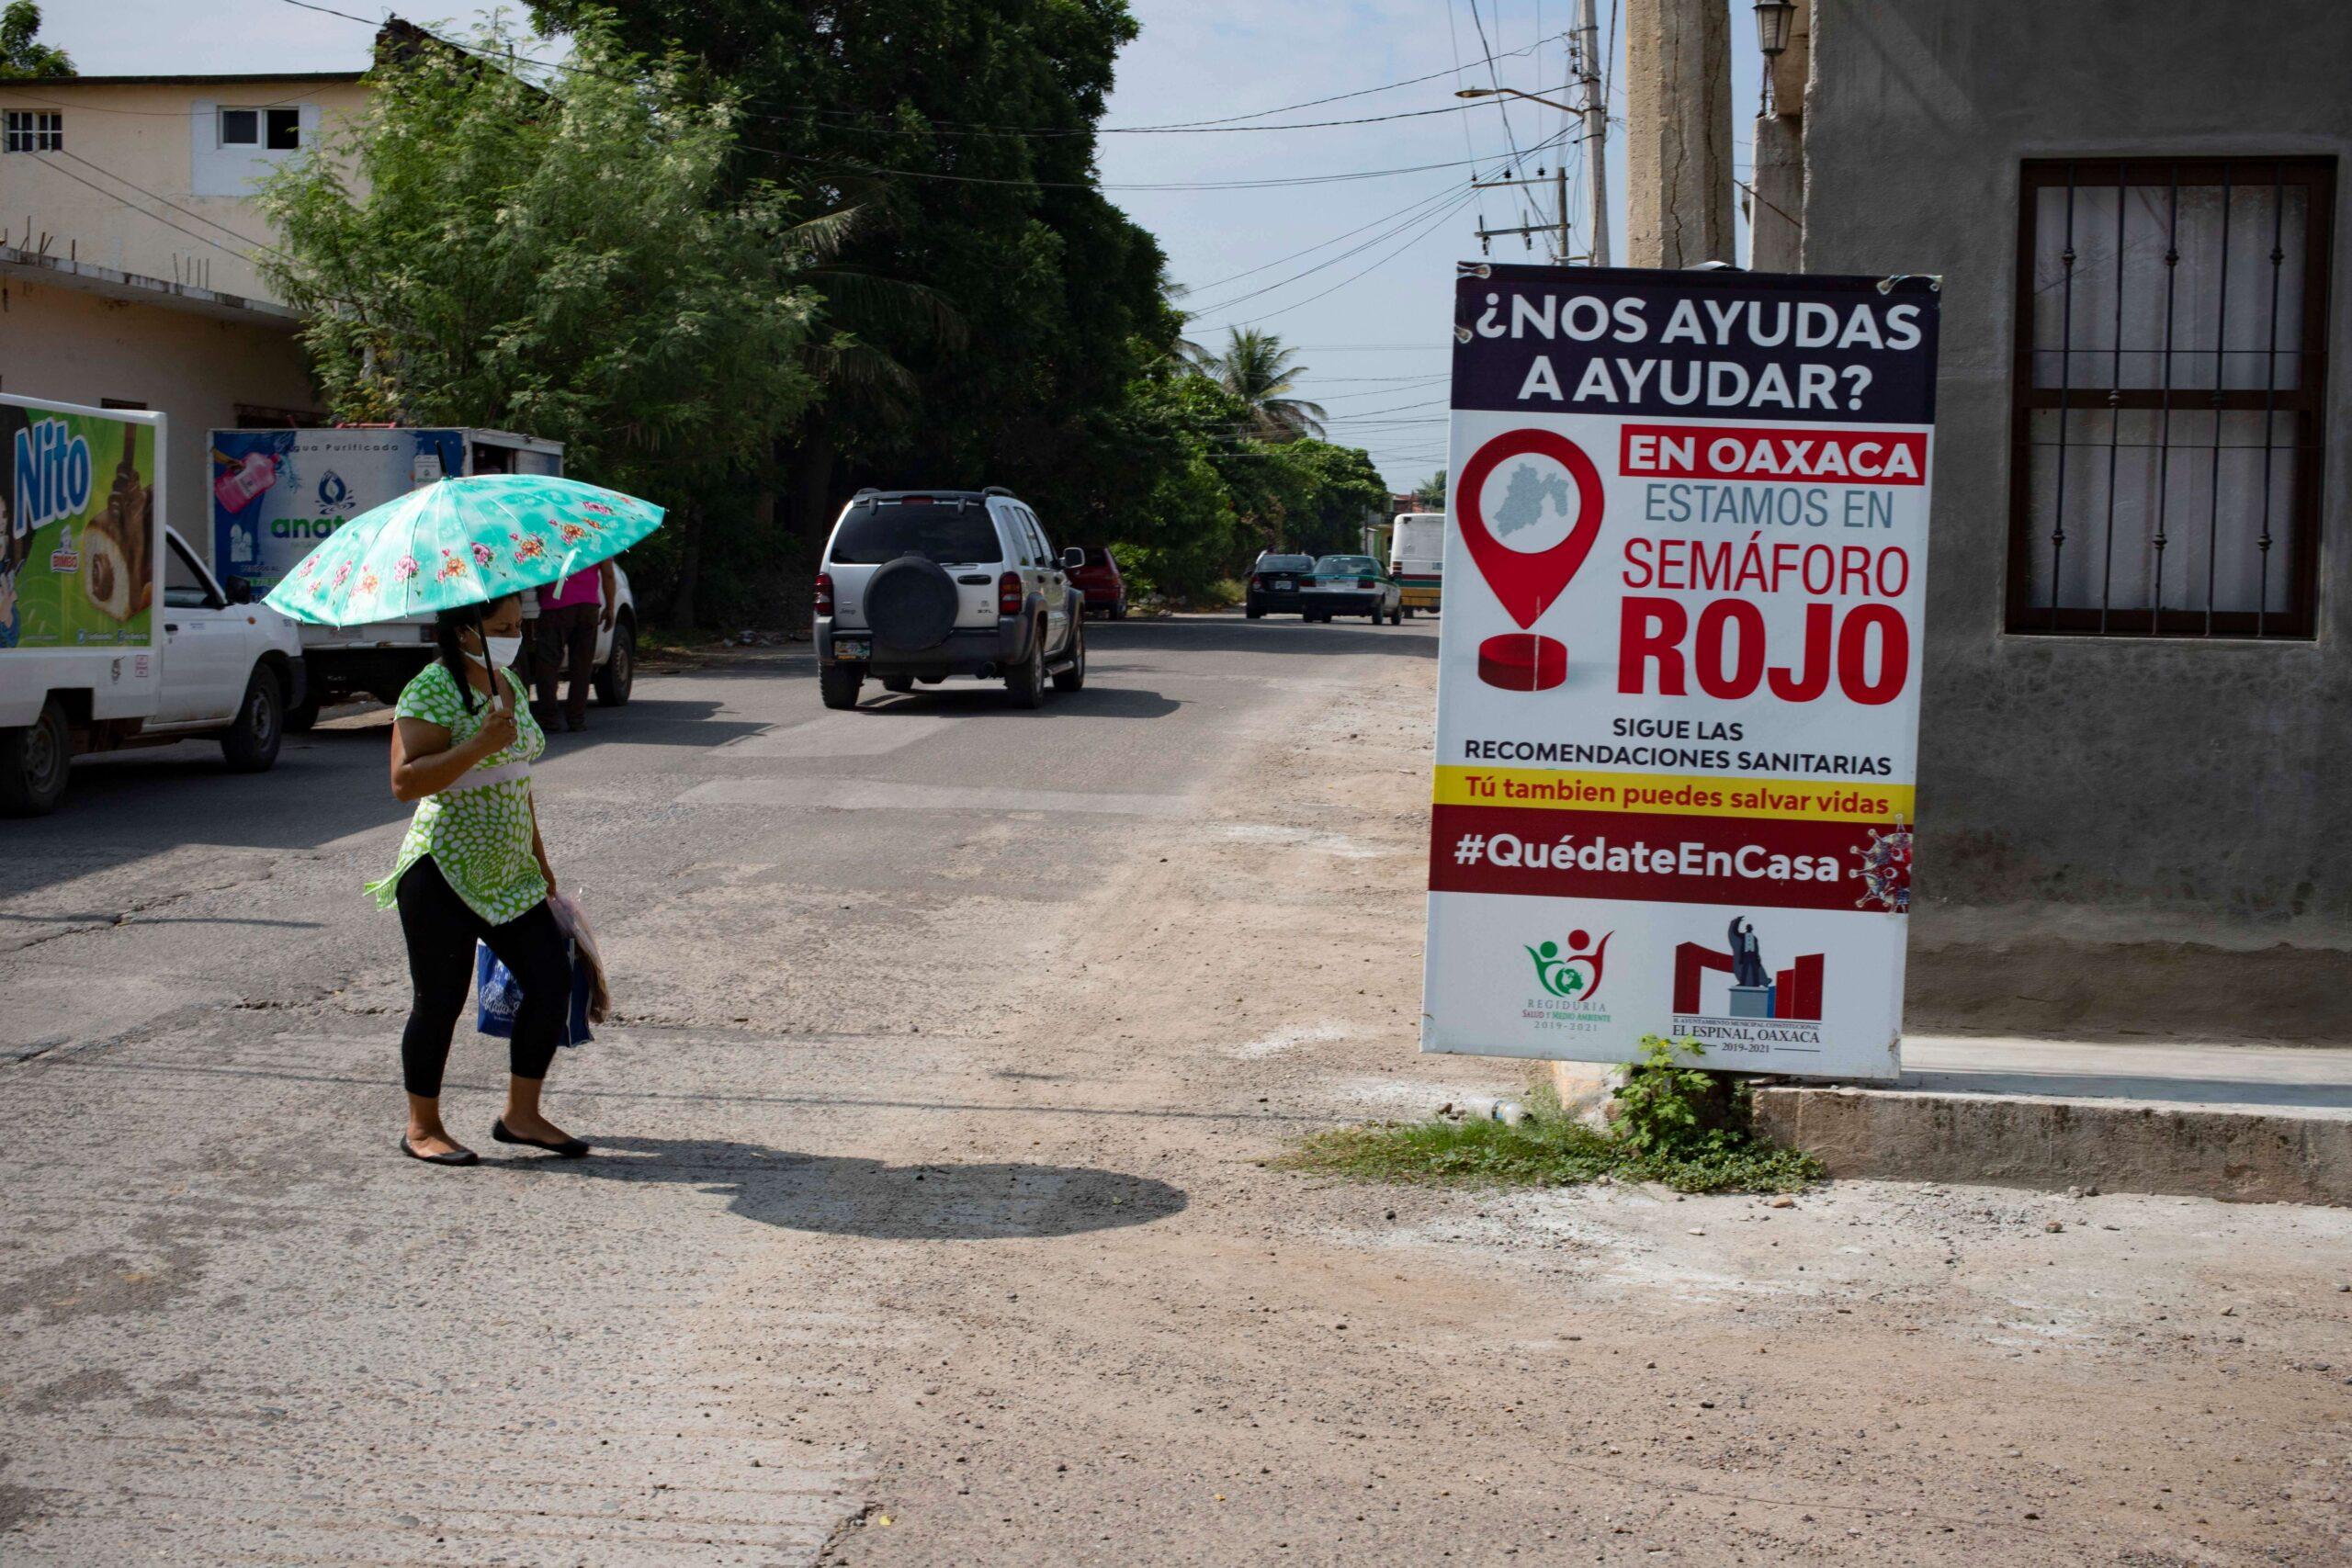 The streets of Ixtepec are plastered with pandemic warning signs posted by city officials / Javier García